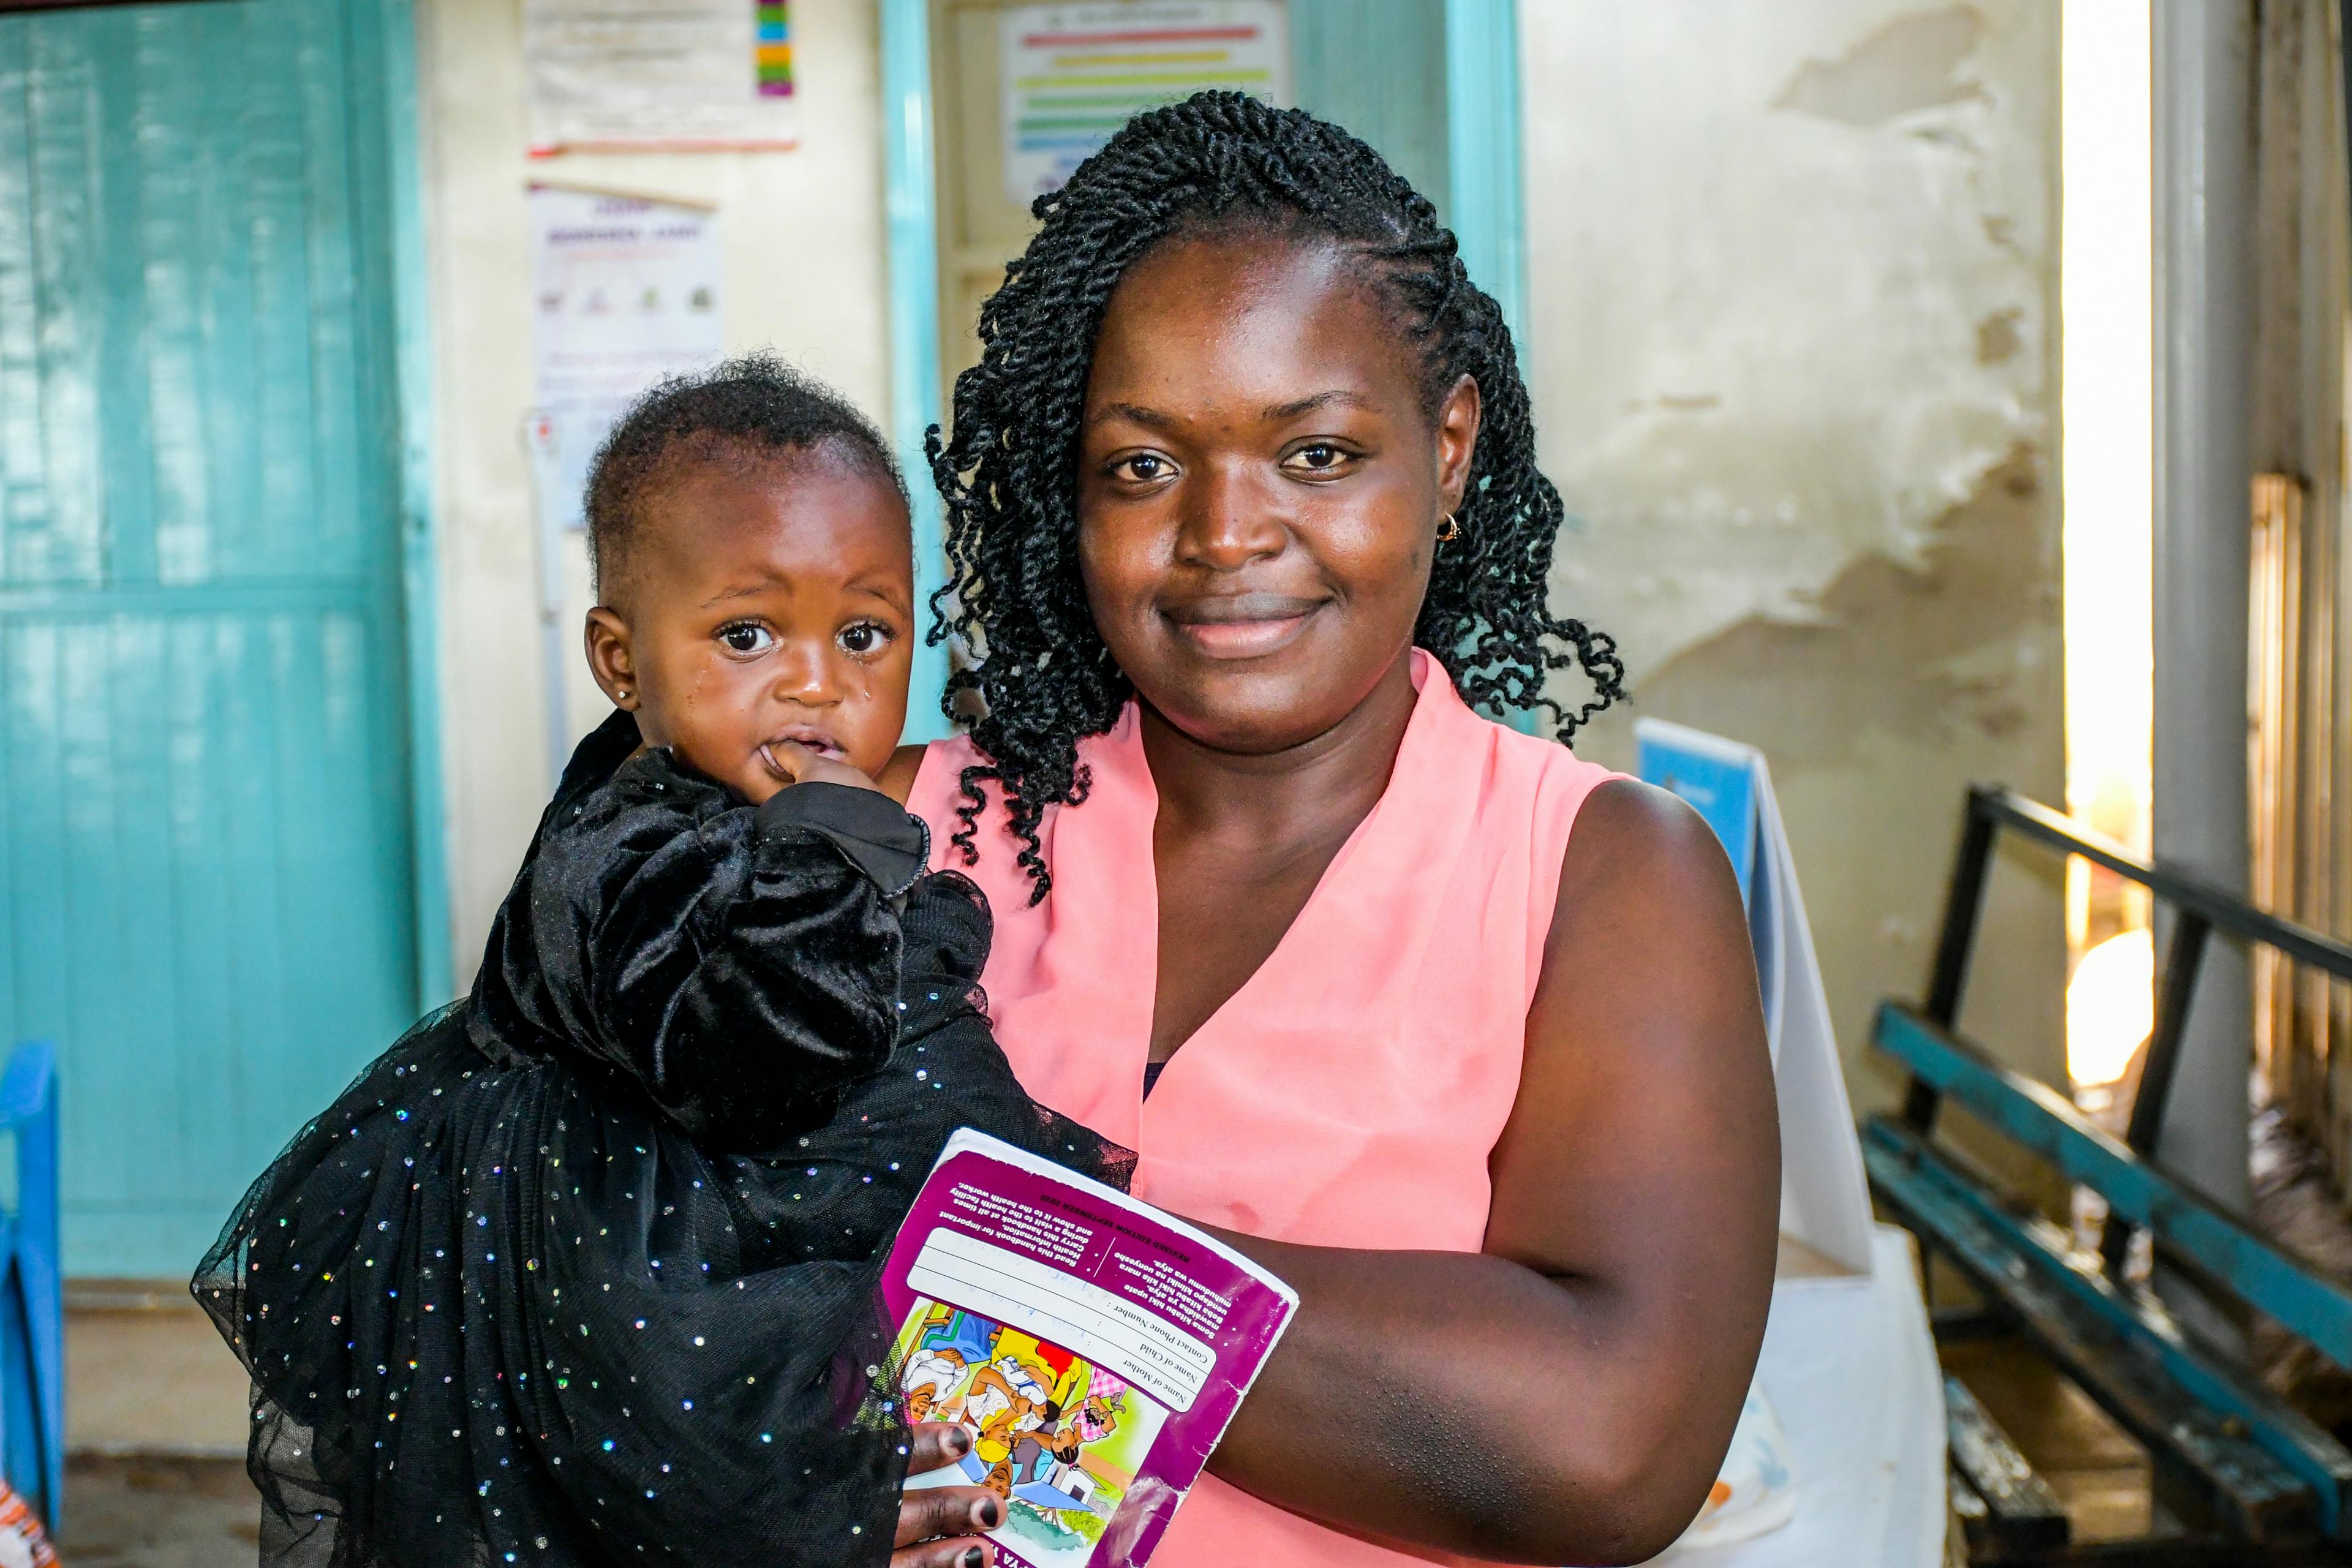 On 24 November 2023 in Kenya, 3-month-old Faith Nzilani is held by her mother, Rose Achieng, who has brought her to Kisumu County Referral Hospital to be vaccinated against malaria.